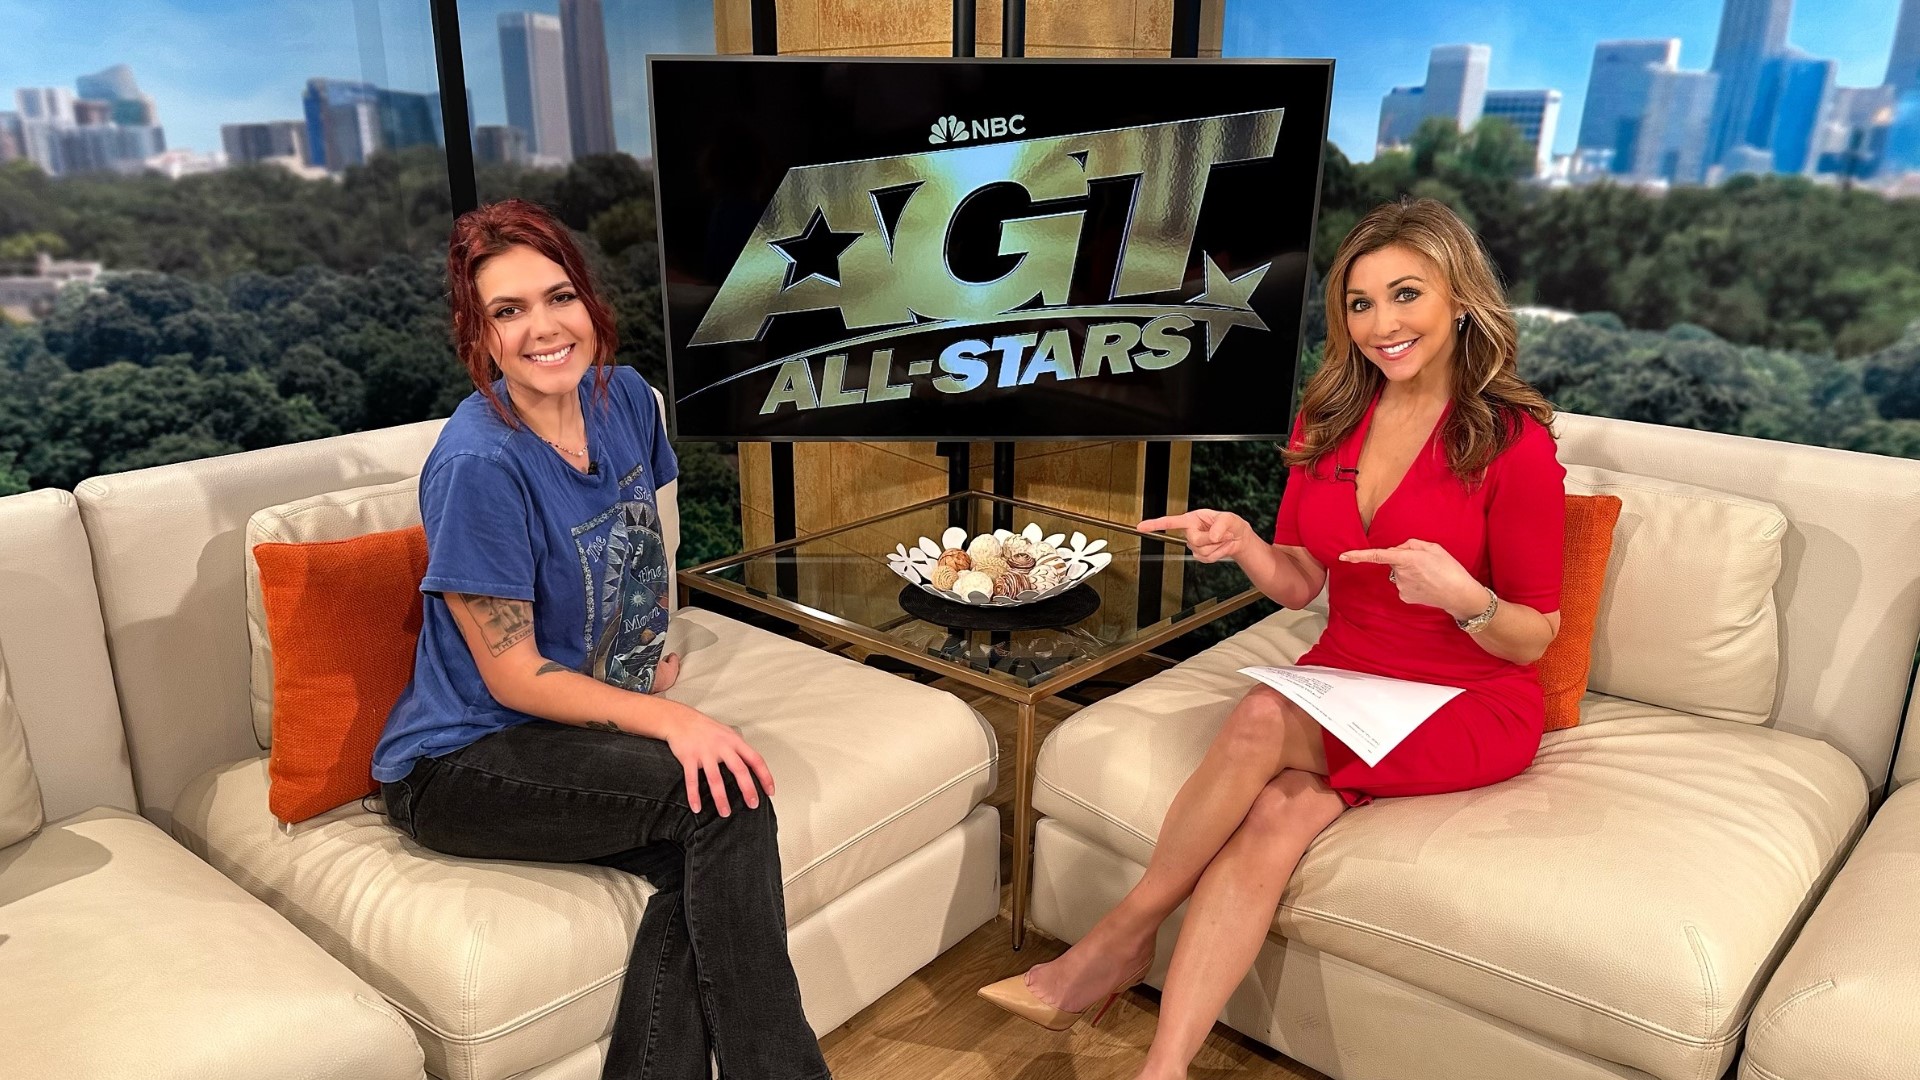 'America's Got Talent' All-Star Caly Bevier chats with Christine about the new season of AGT and her growing success since that first Golden Buzzer.